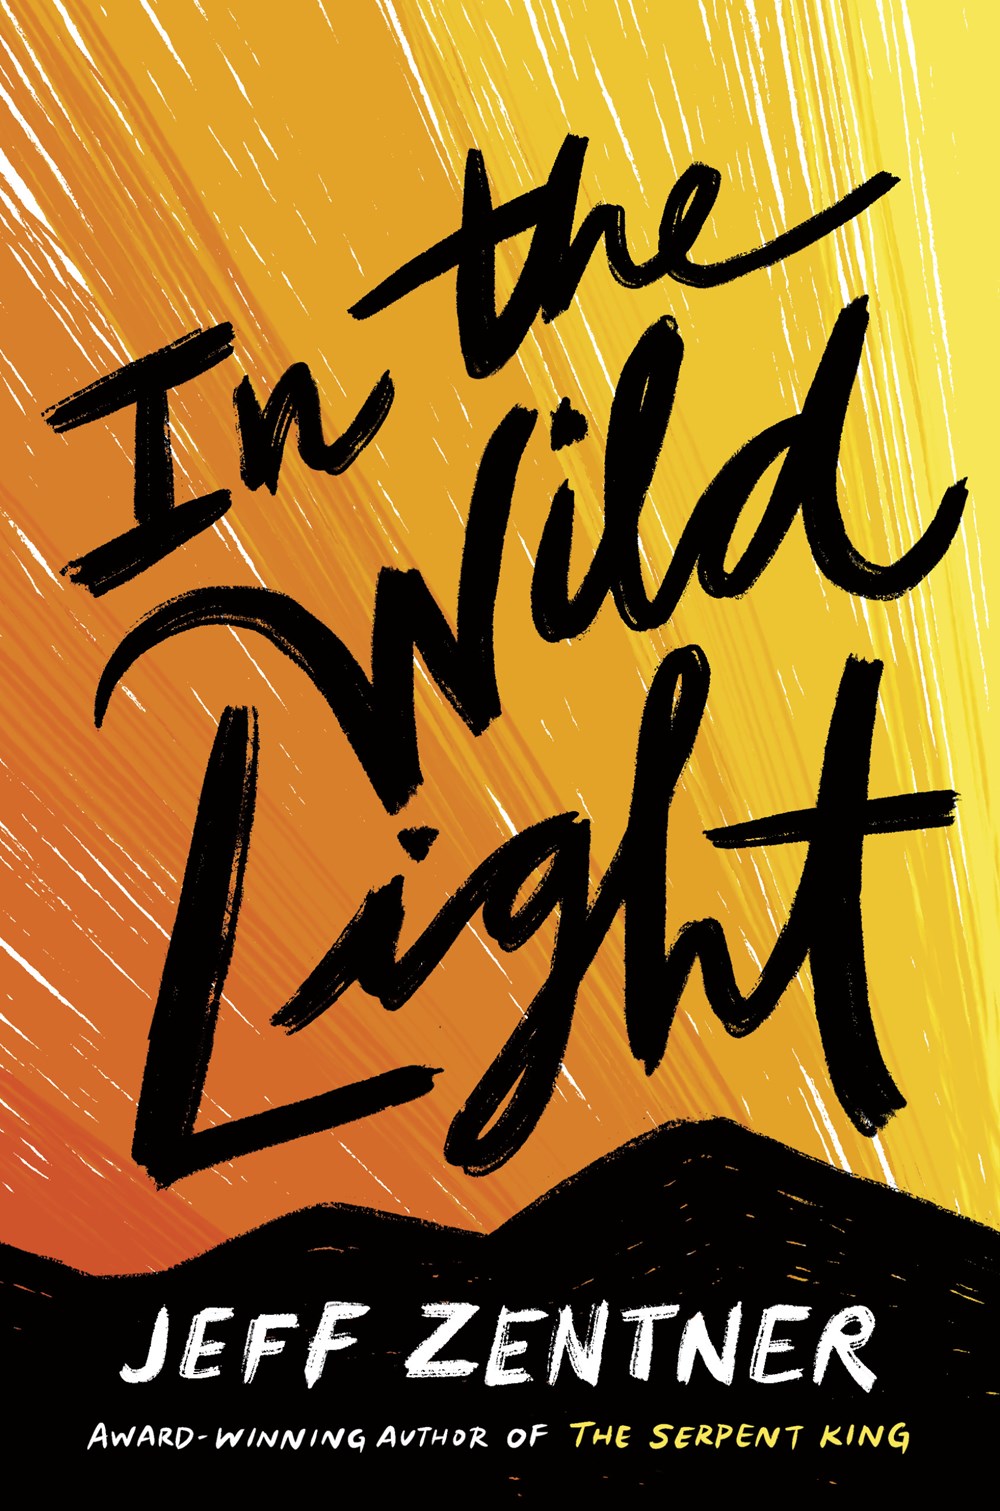 Cover image for In the Wild Light by Jeff Zentner